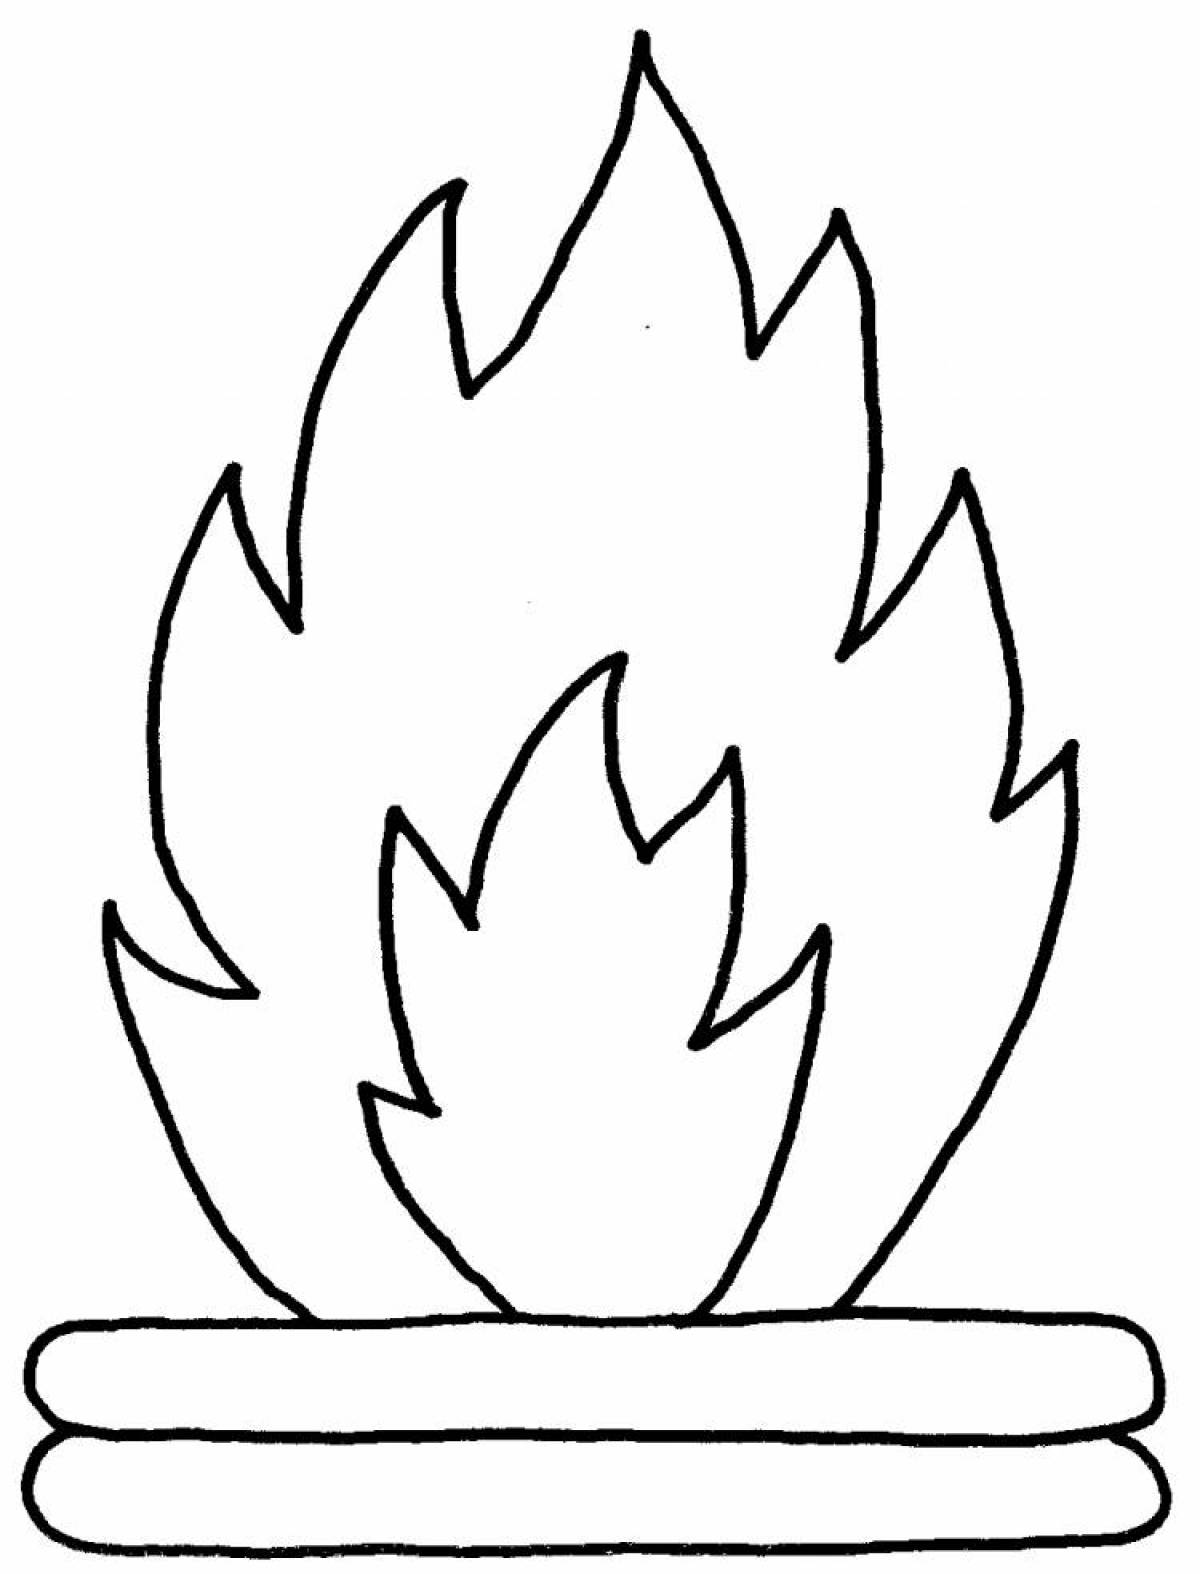 Coloring page stimulating fire for kids